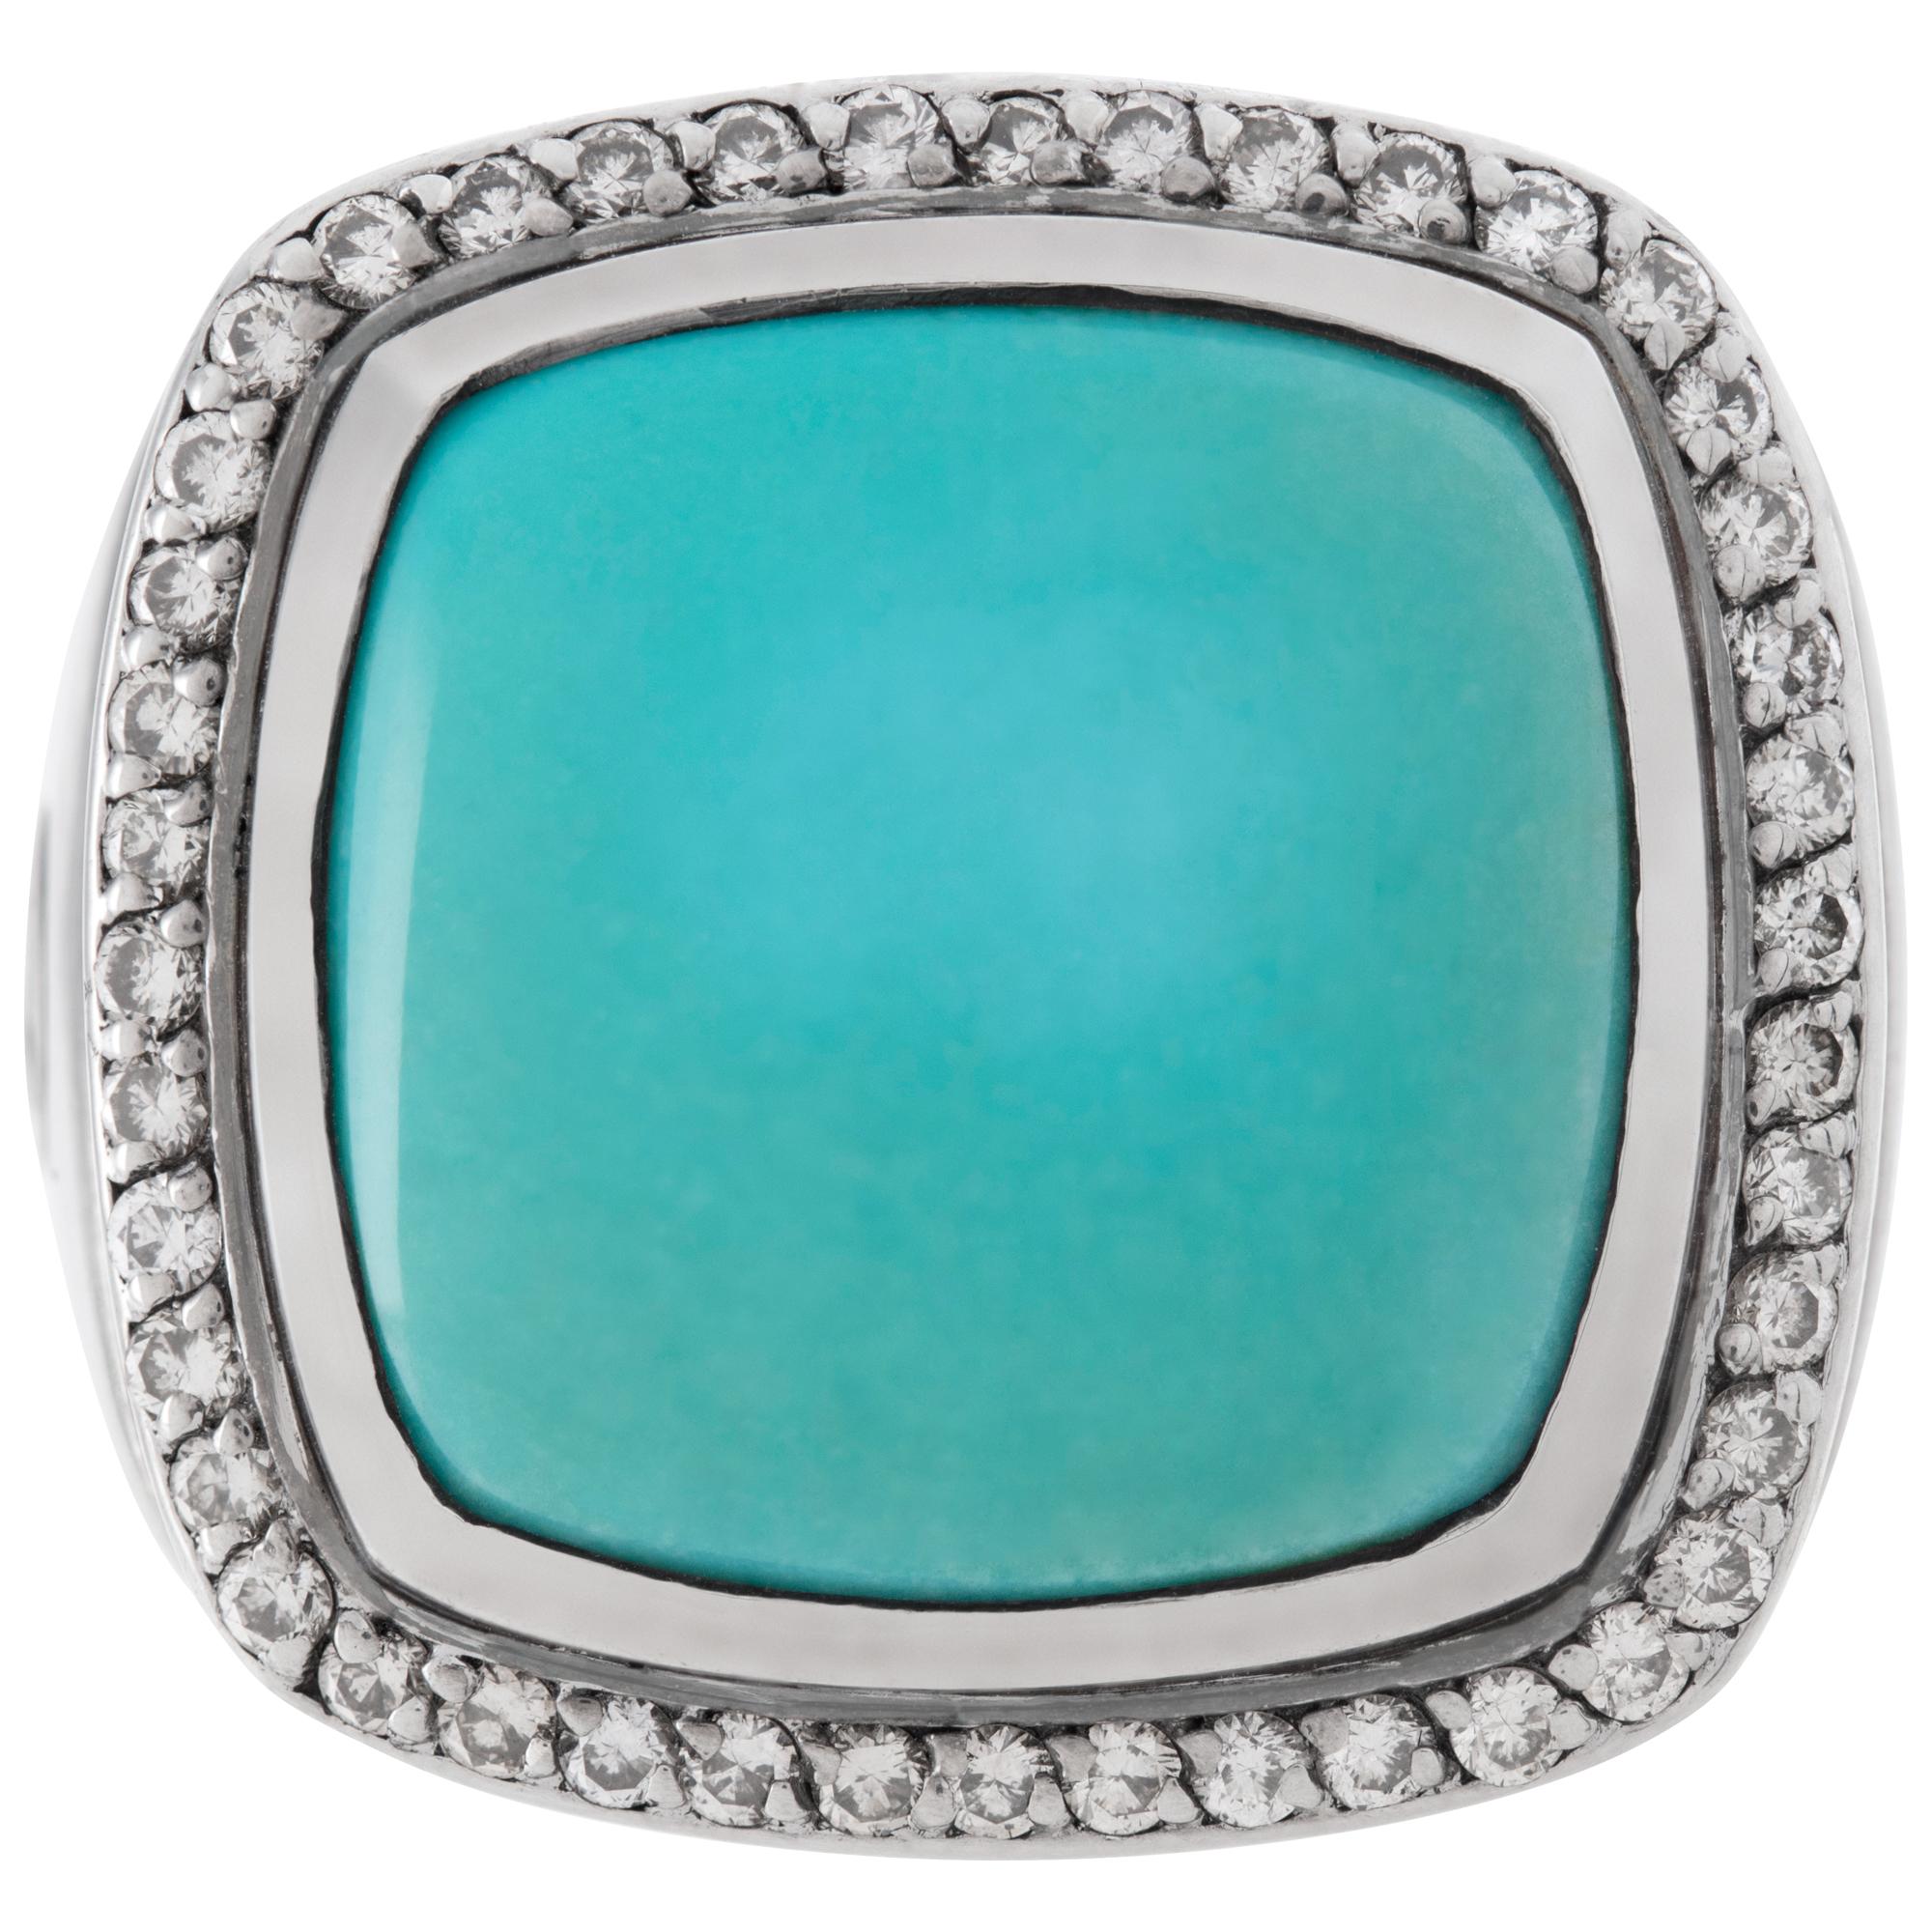 David Yurman Turquoise Albion ring in sterling silver ring with diamond accents. With pouch. Size 7This David Yurman ring is currently size 7 and some items can be sized up or down, please ask! It weighs 8.5 pennyweights and is Sterling Silver.